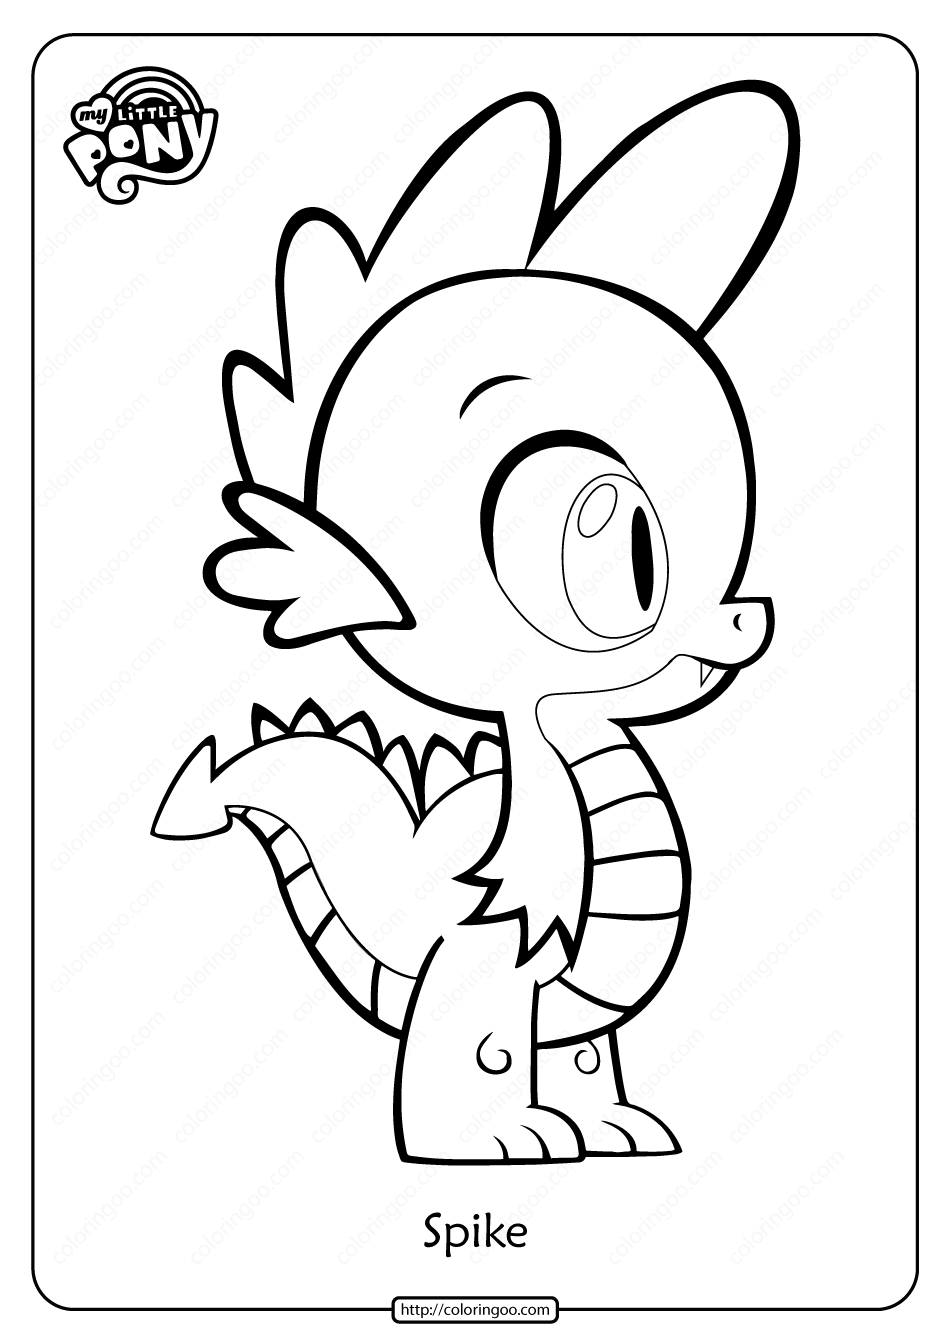 Free Printable My Little Pony Spike Coloring Page | My little pony  twilight, My little pony applejack, My little pony coloring